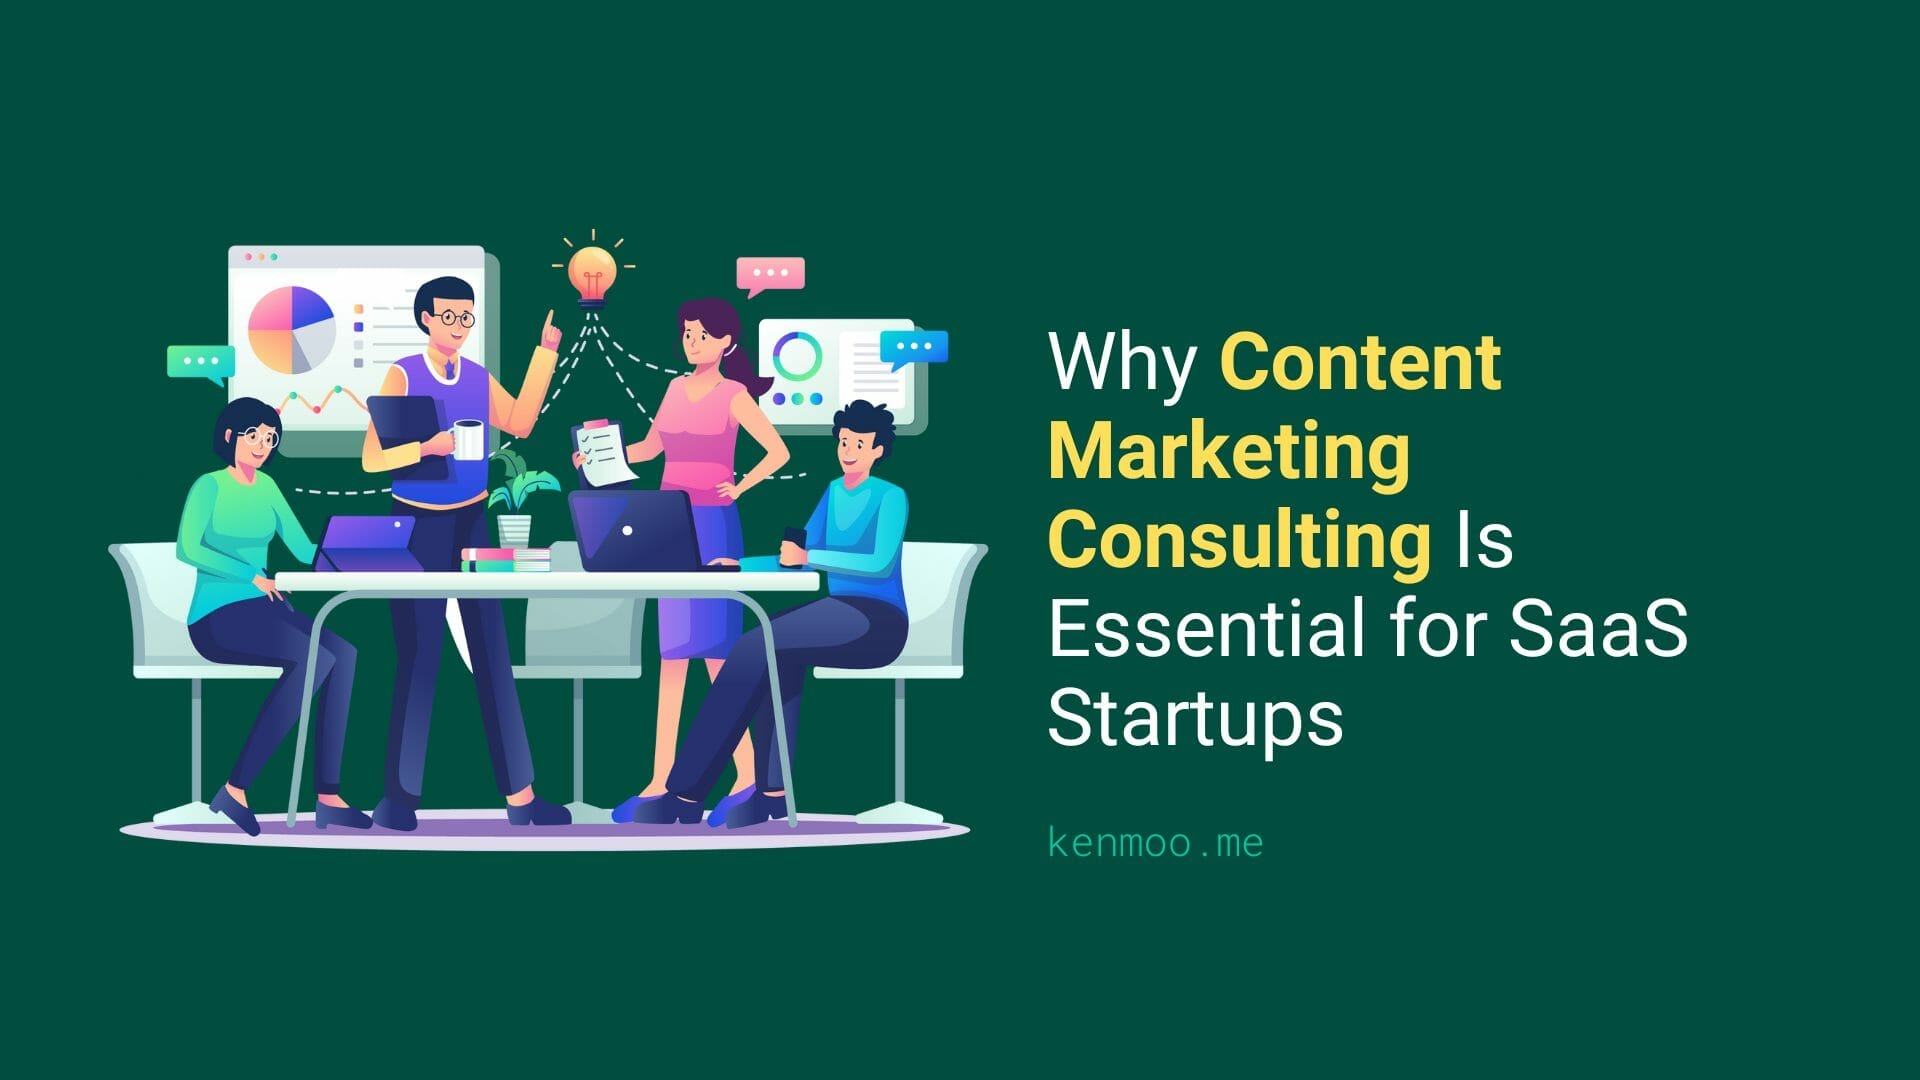 Why Content Marketing Consulting Is Essential for SaaS Startups